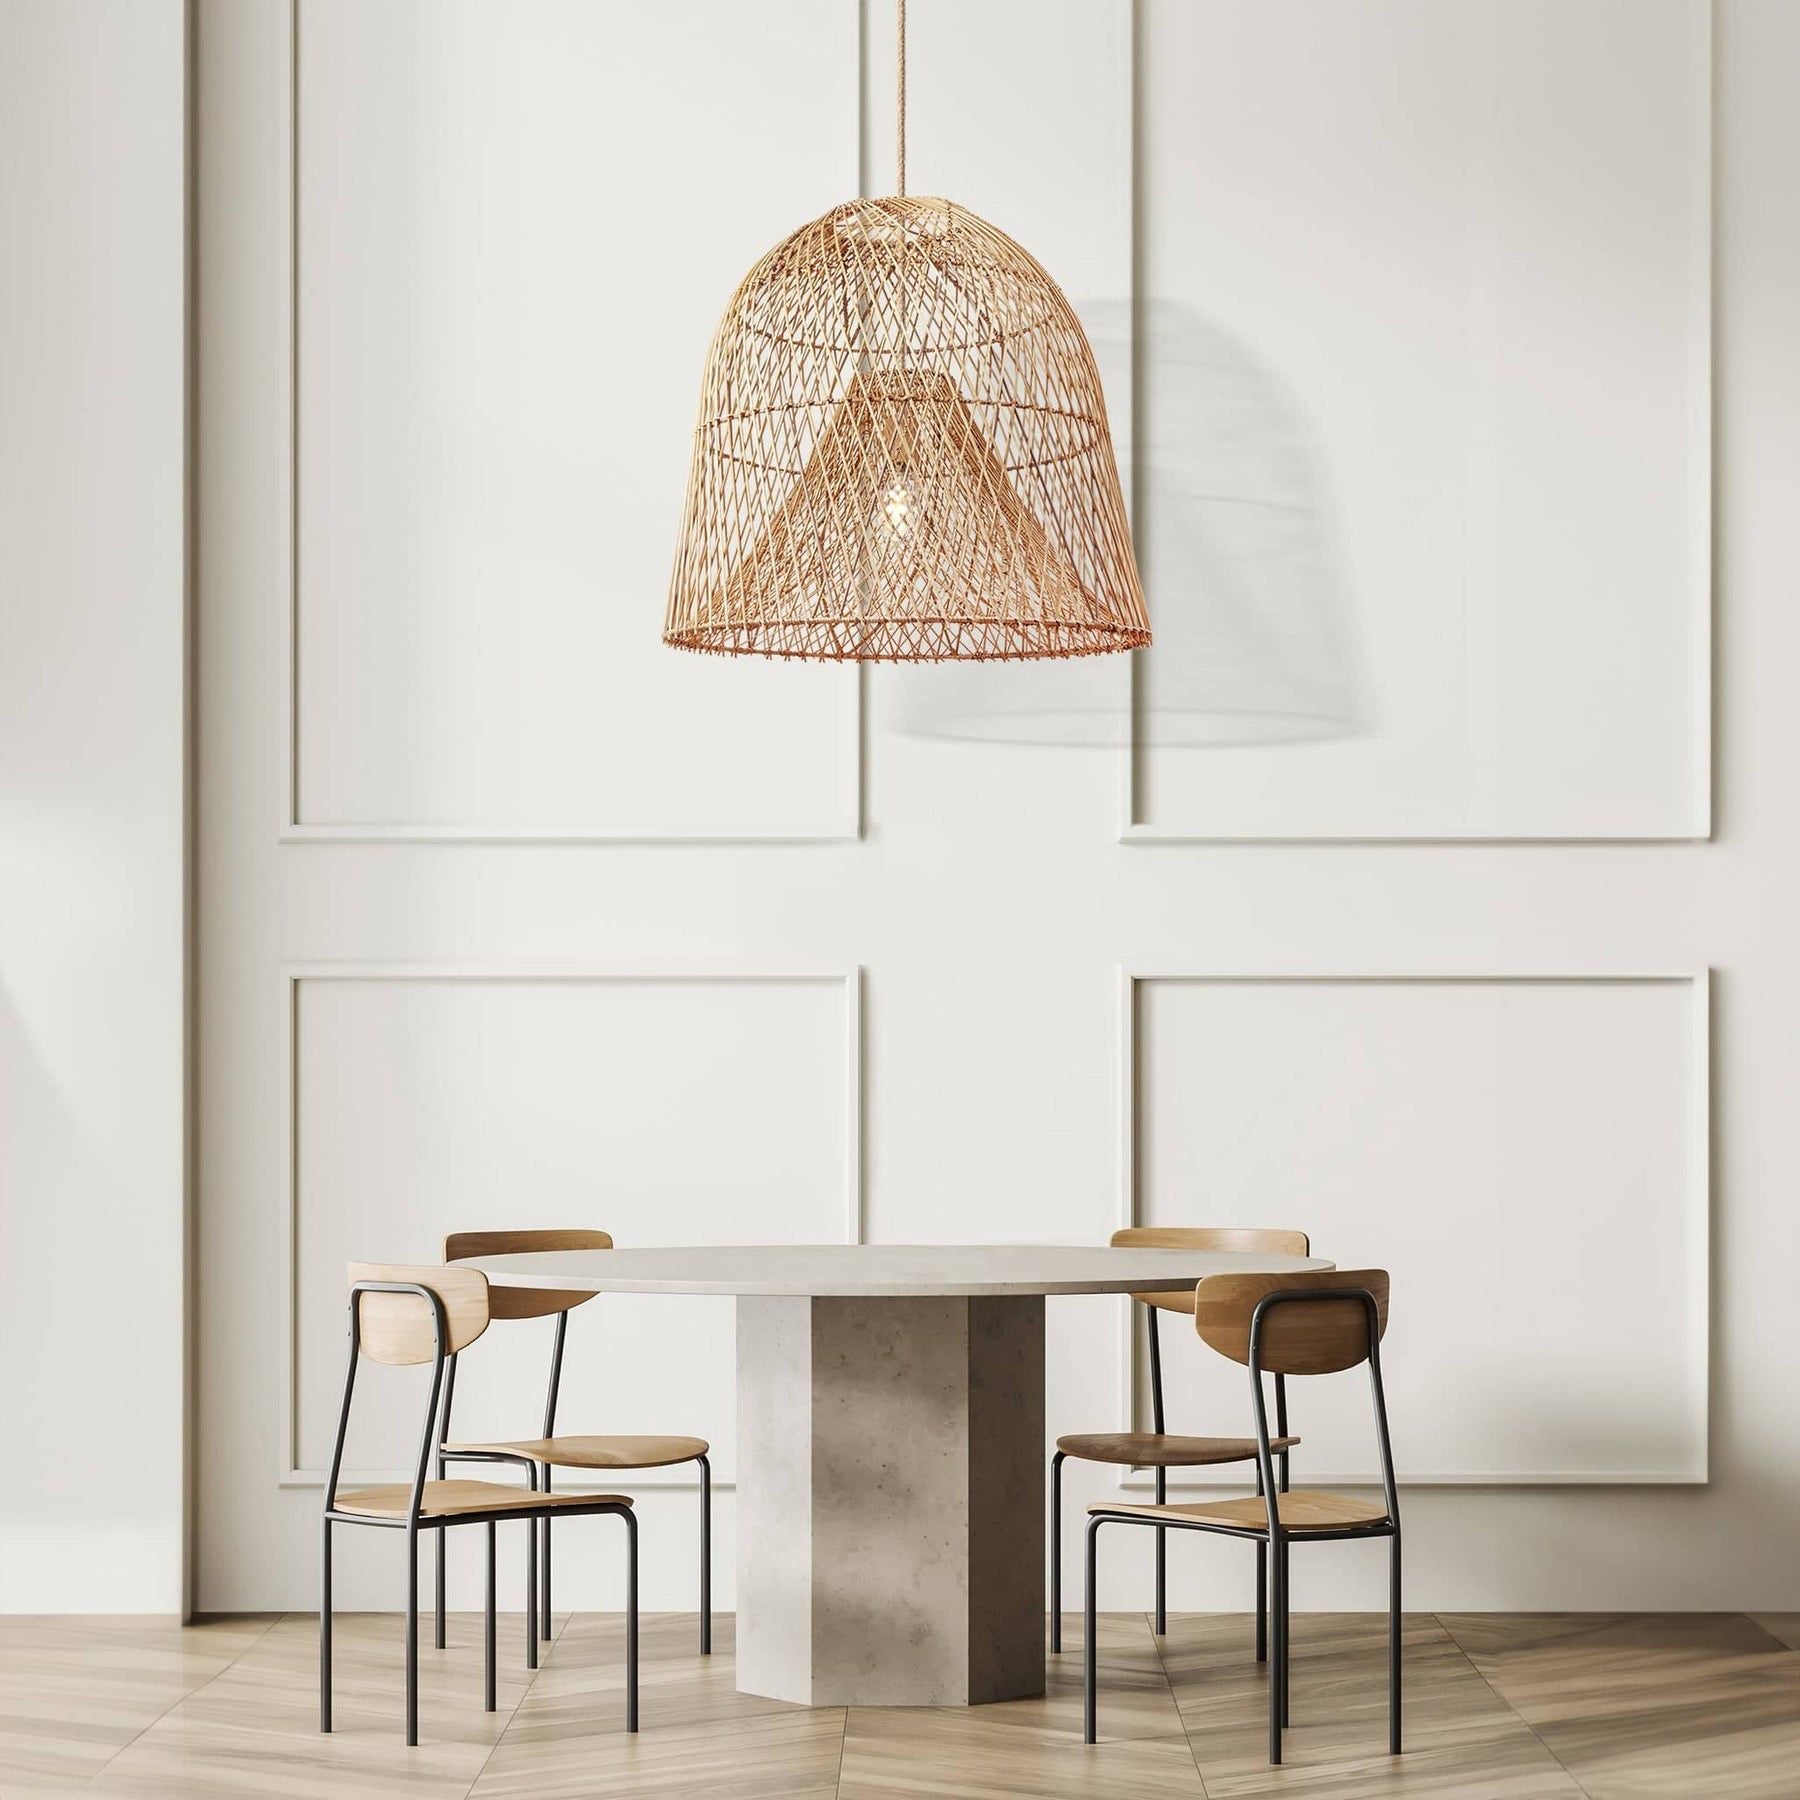 hanging lights made from rattan with unique design help increase creativity in your home